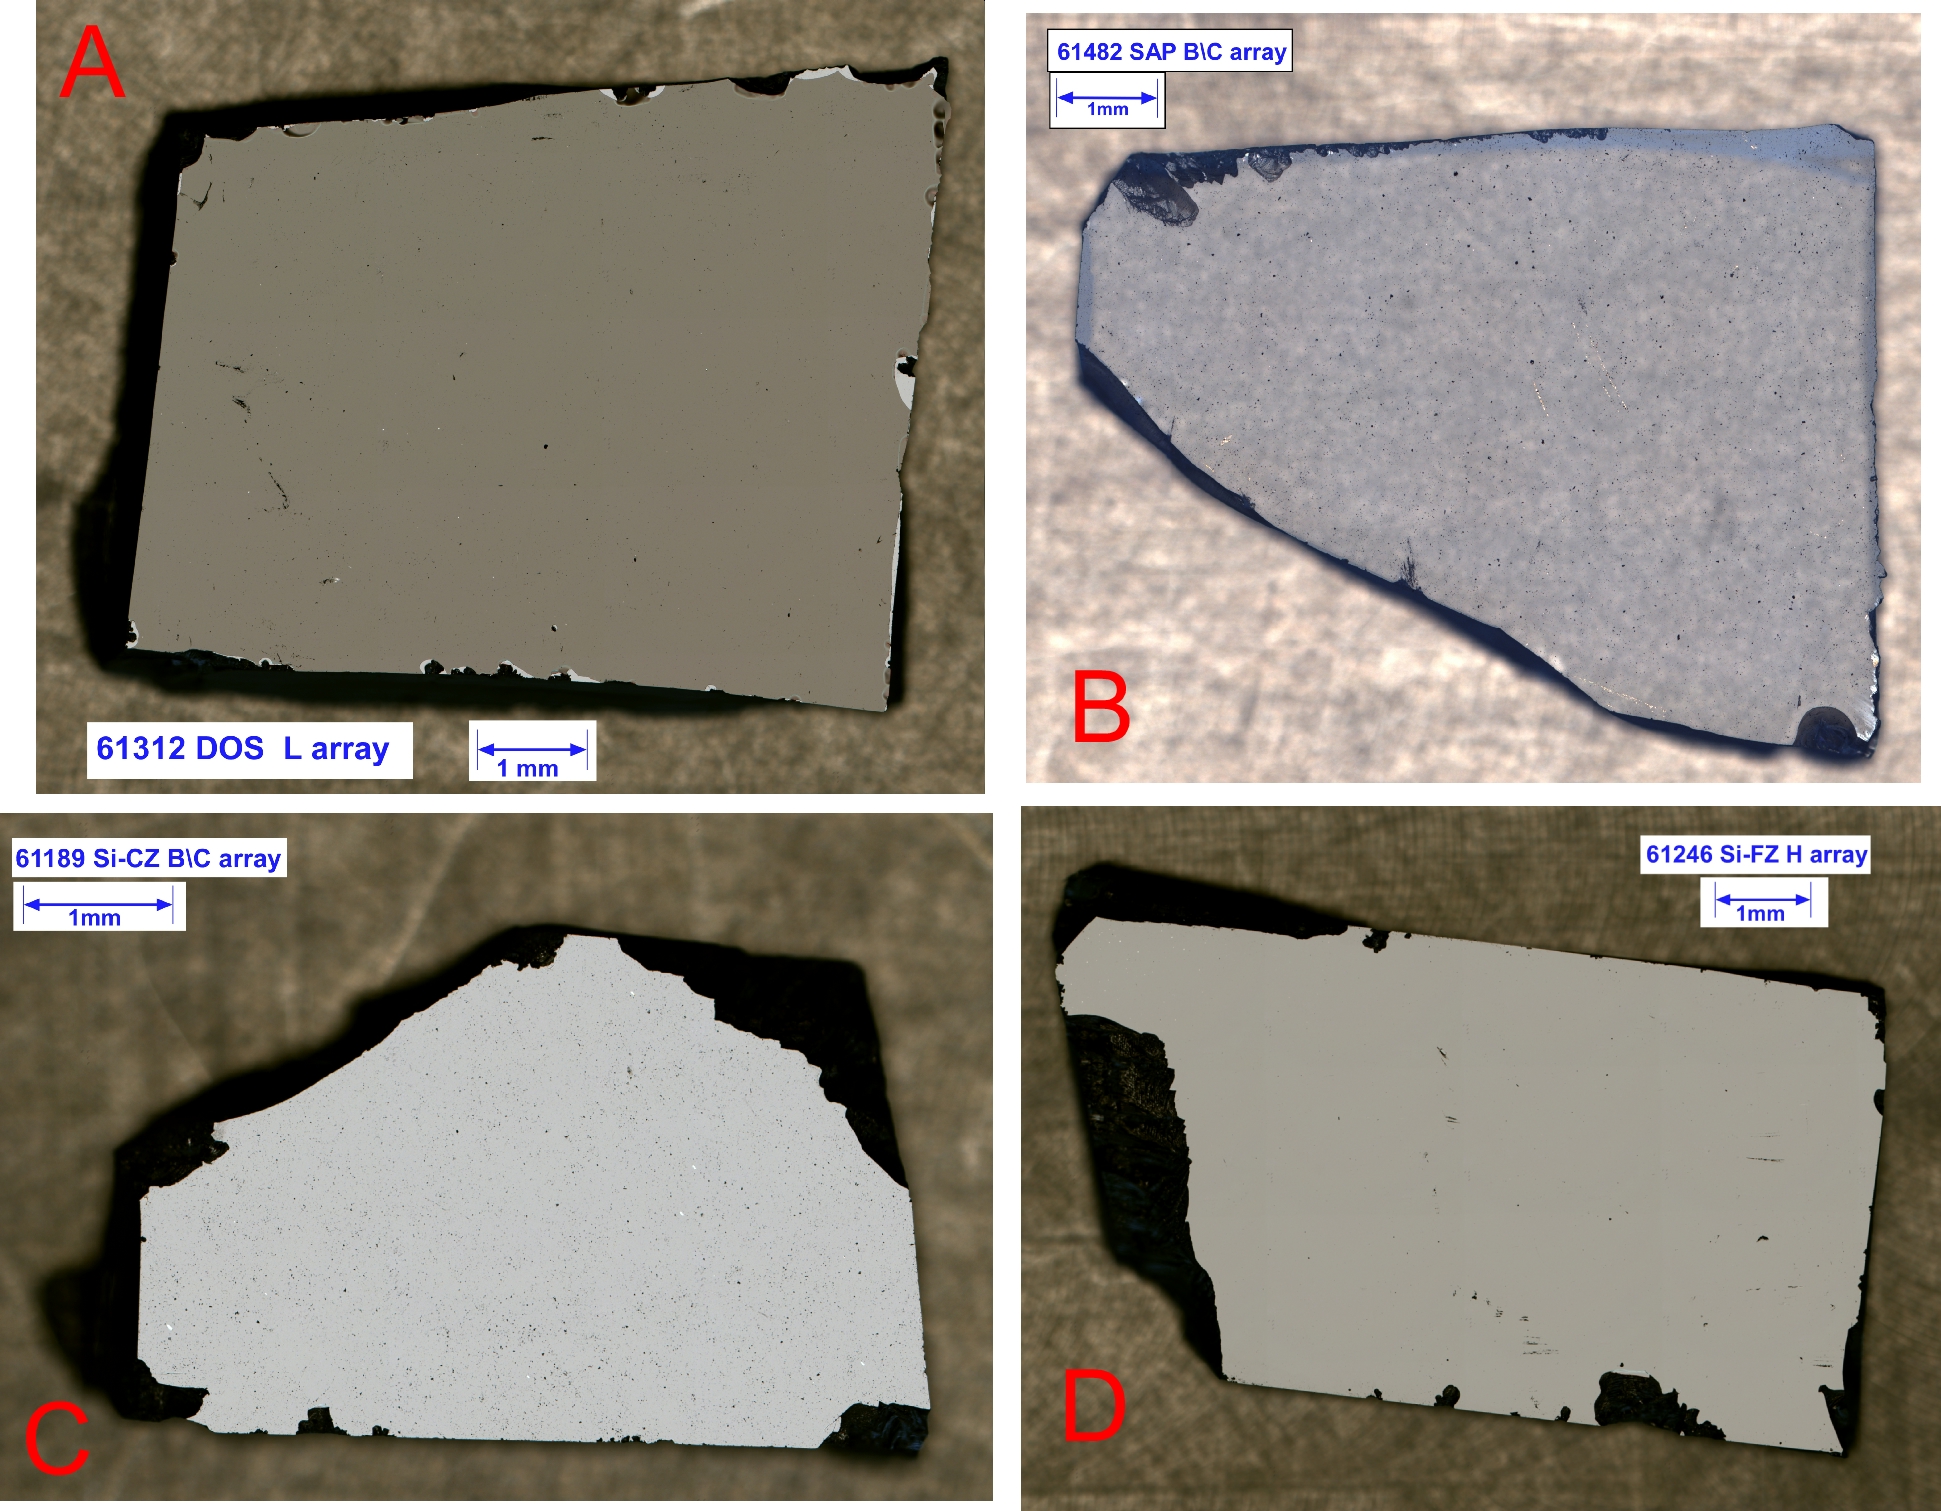 Genesis sample fragments after full characterization.